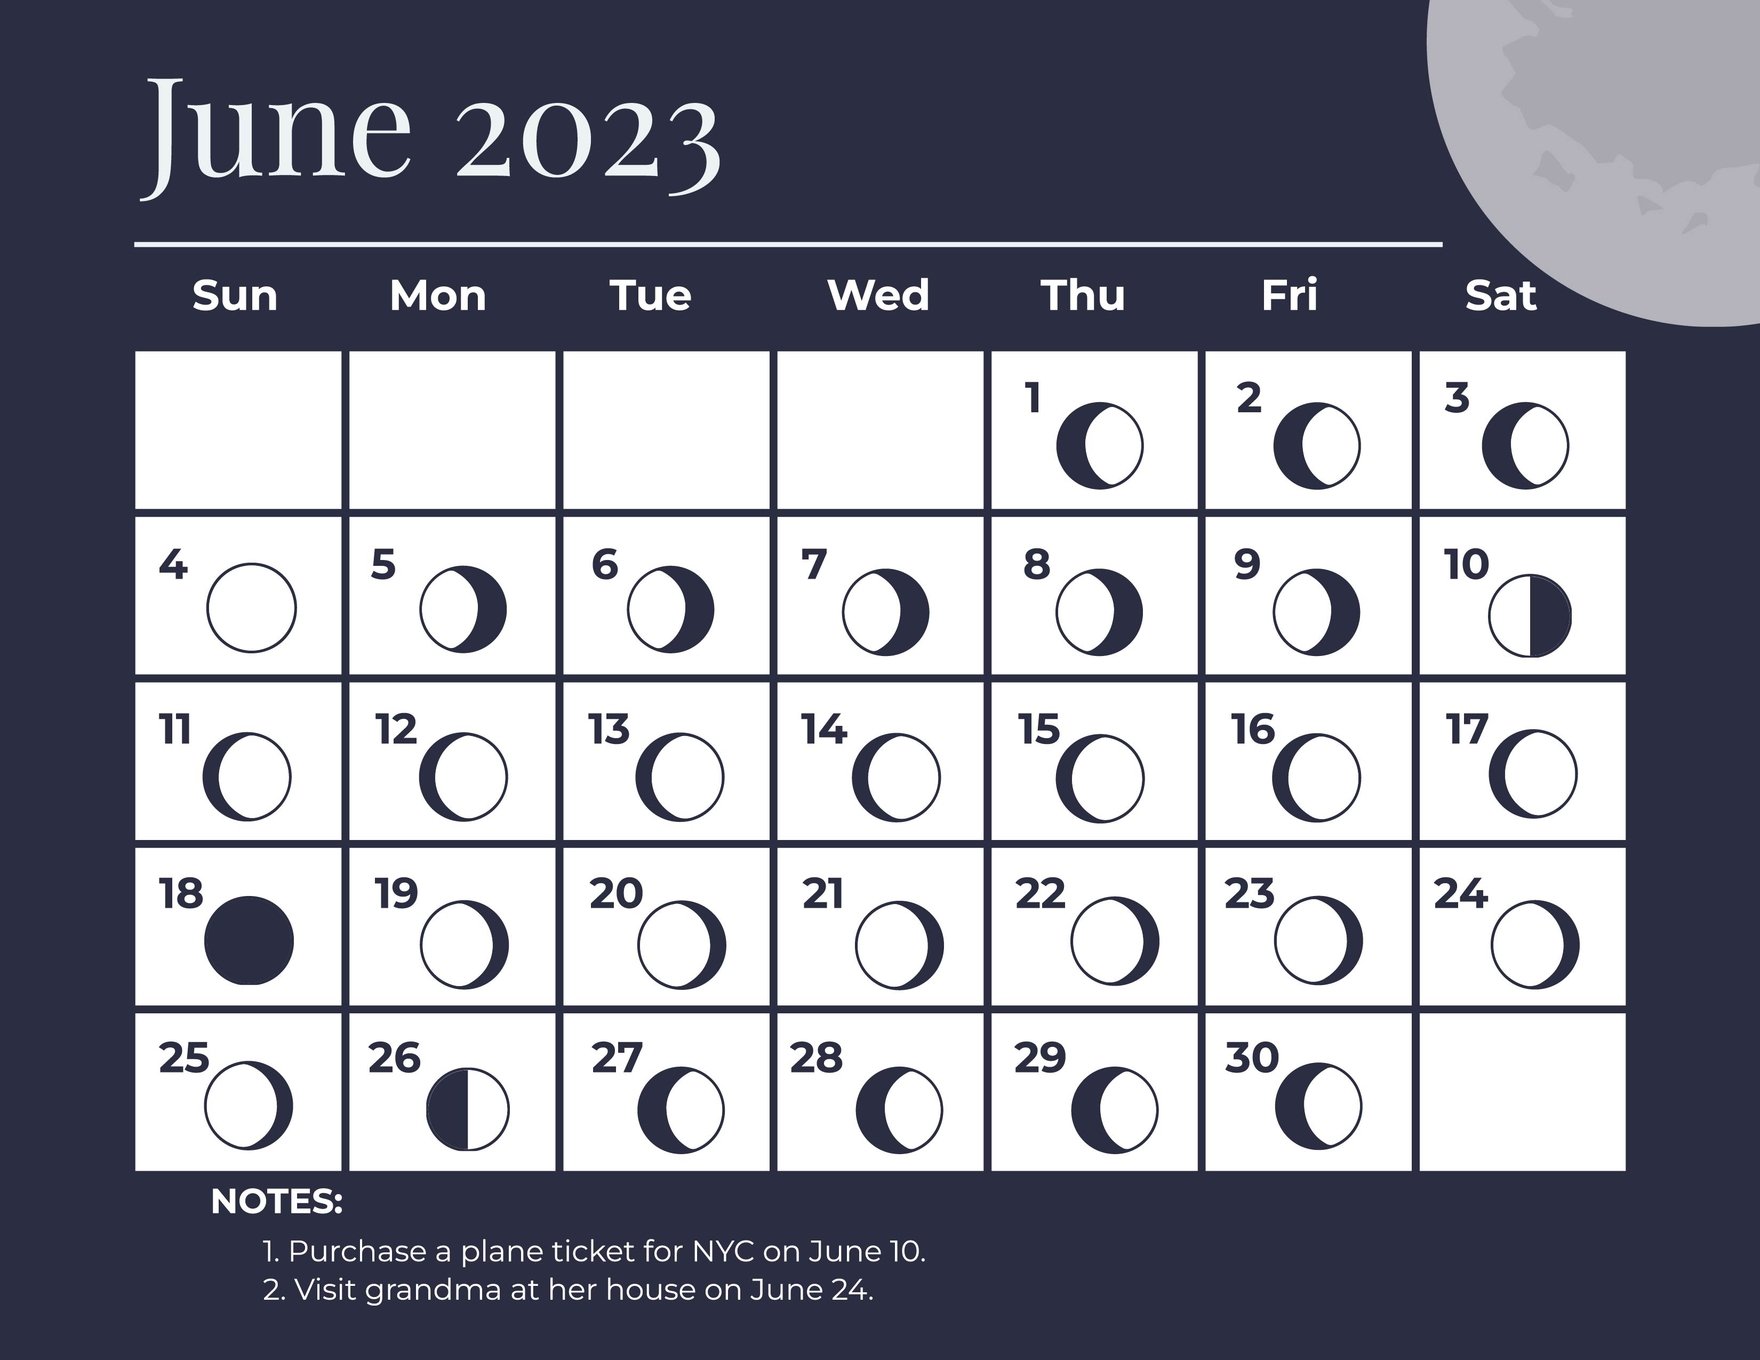 June 2023 Calendar Template With Moon Phases